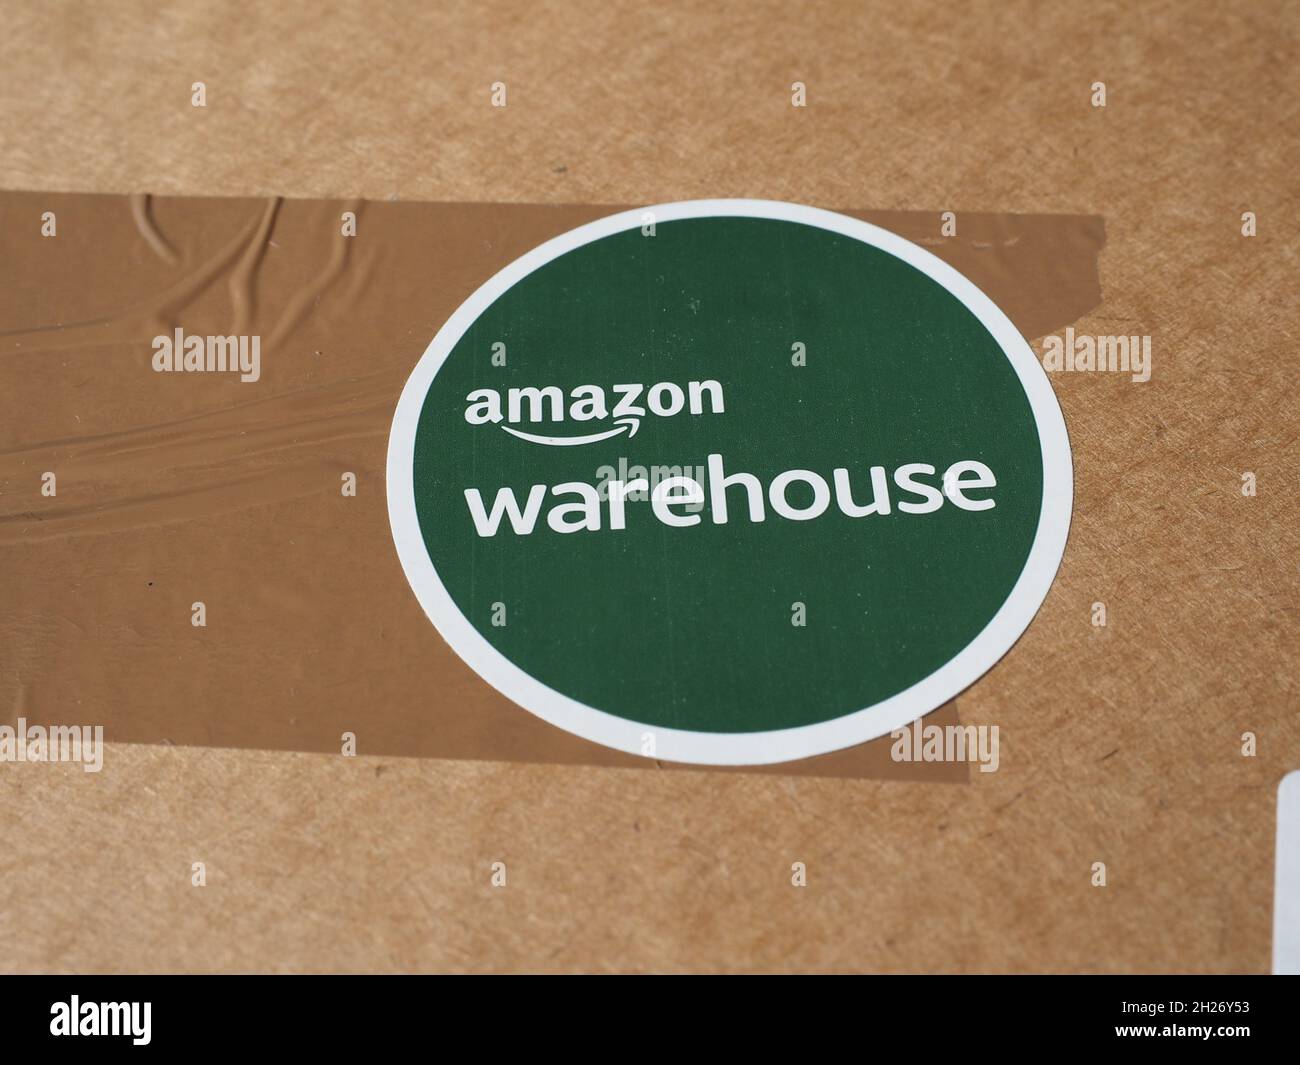 https://c8.alamy.com/comp/2H26Y53/seattle-usa-circa-october-2021-amazon-warehouse-offers-great-deals-on-quality-used-pre-owned-or-open-box-products-2H26Y53.jpg